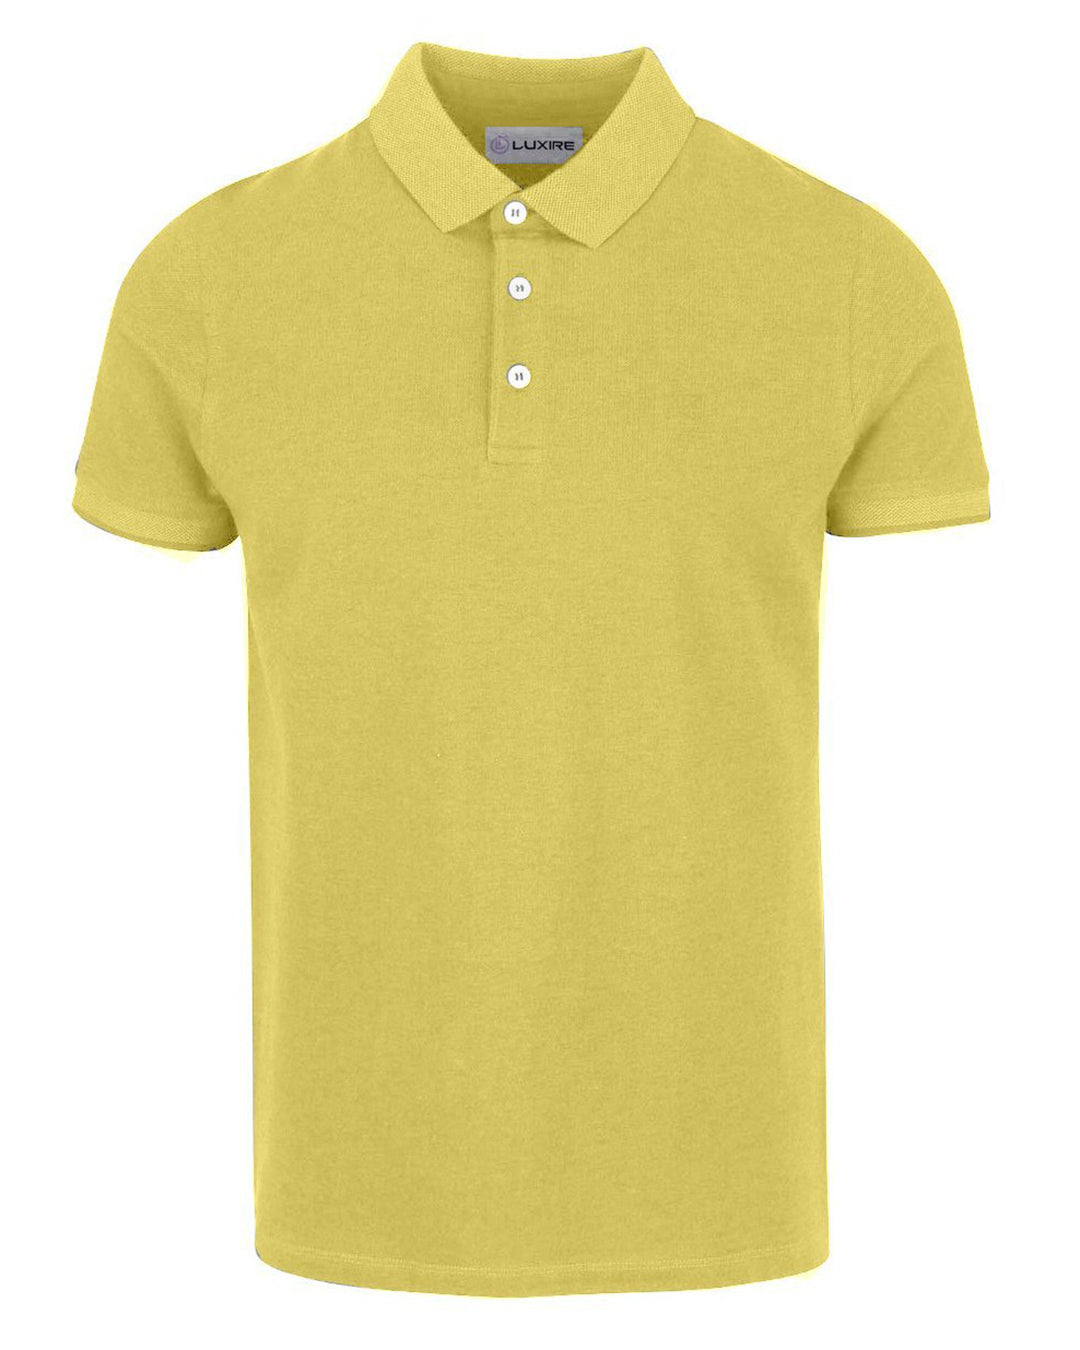 Front of the custom oxford polo shirt for men by Luxire in mid yellow